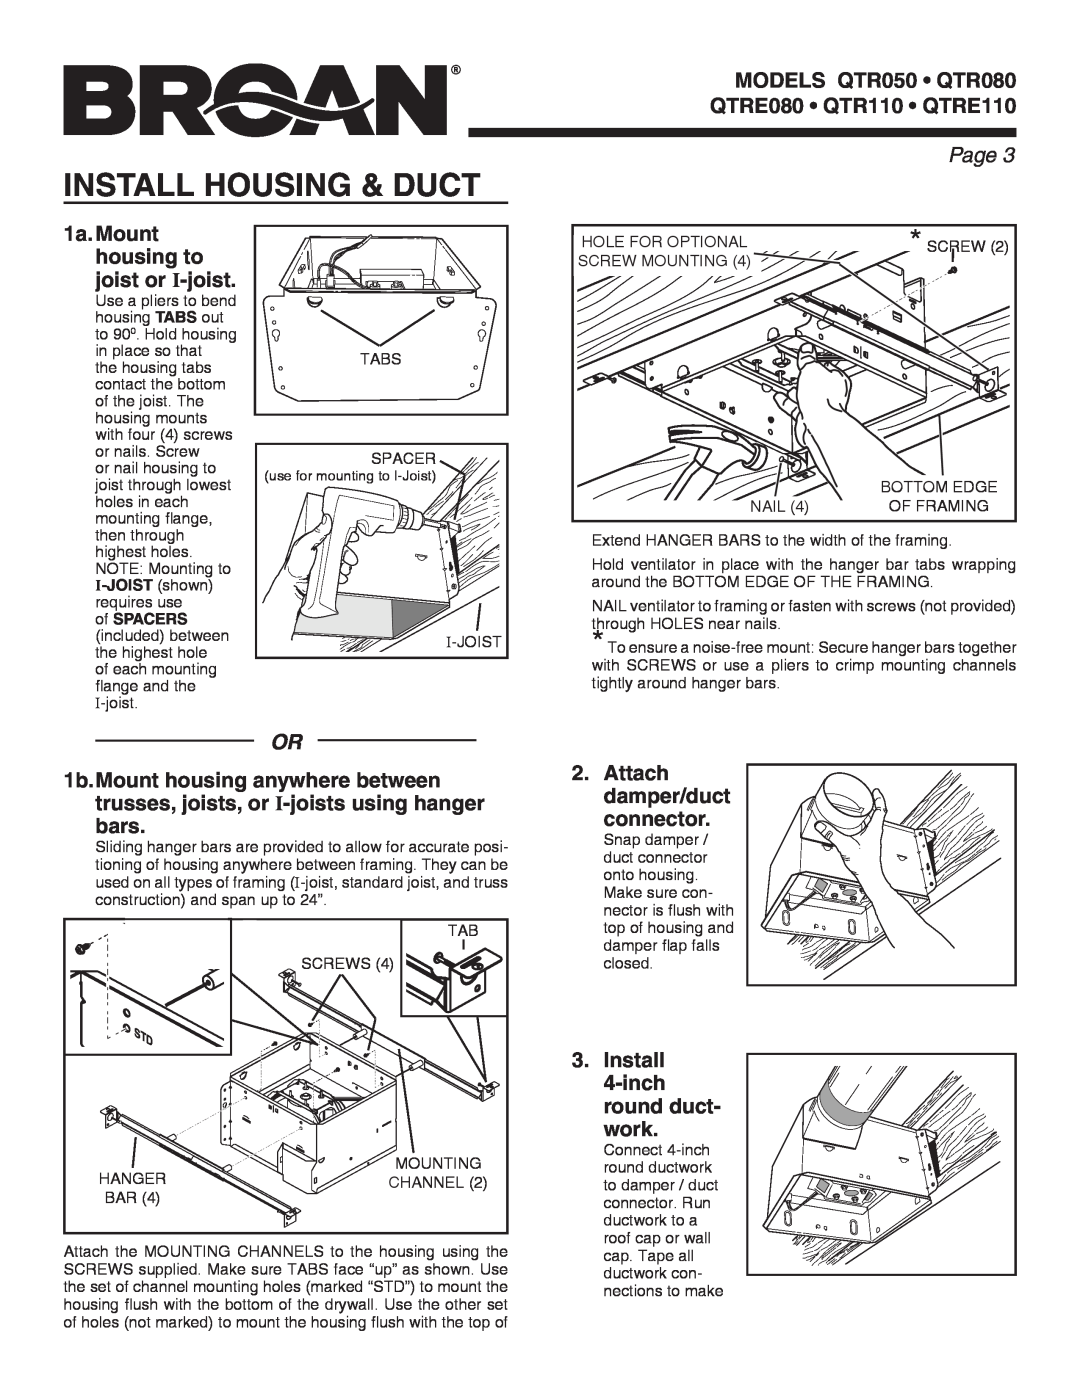 Broan QTR050 warranty Install Housing & Duct, 1a.Mount housing to joist or I-joist, Attach damper/duct connector, Page  